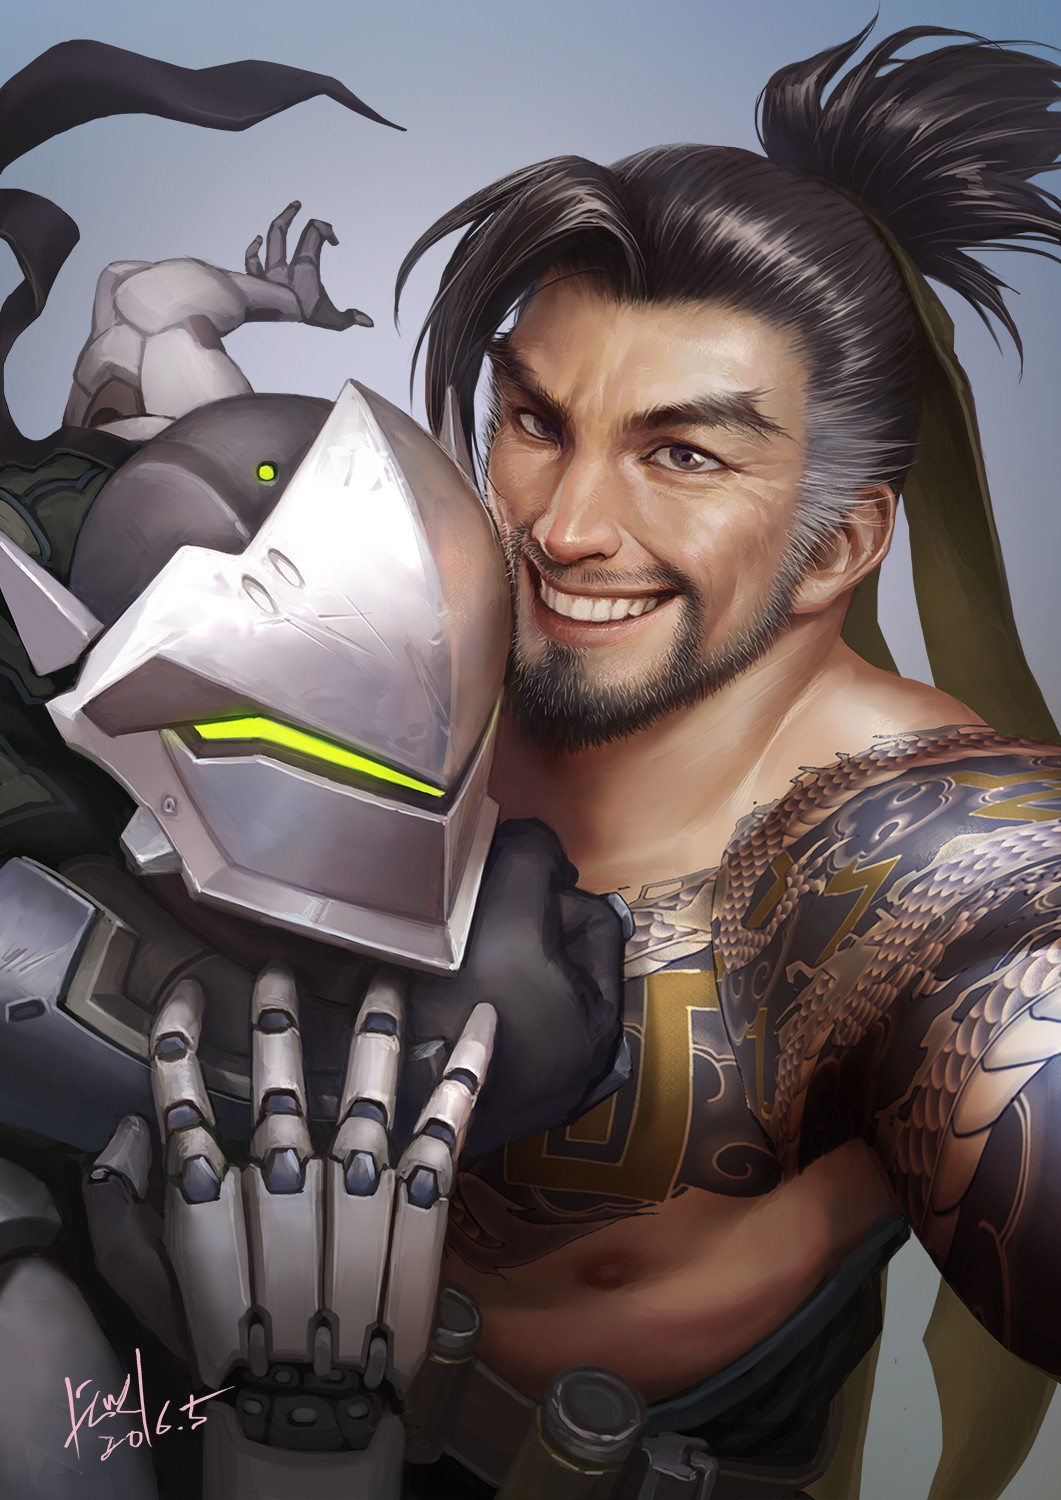 Fine Art: Some Of The World’s Best Artists Are Already In Love With Overwatch